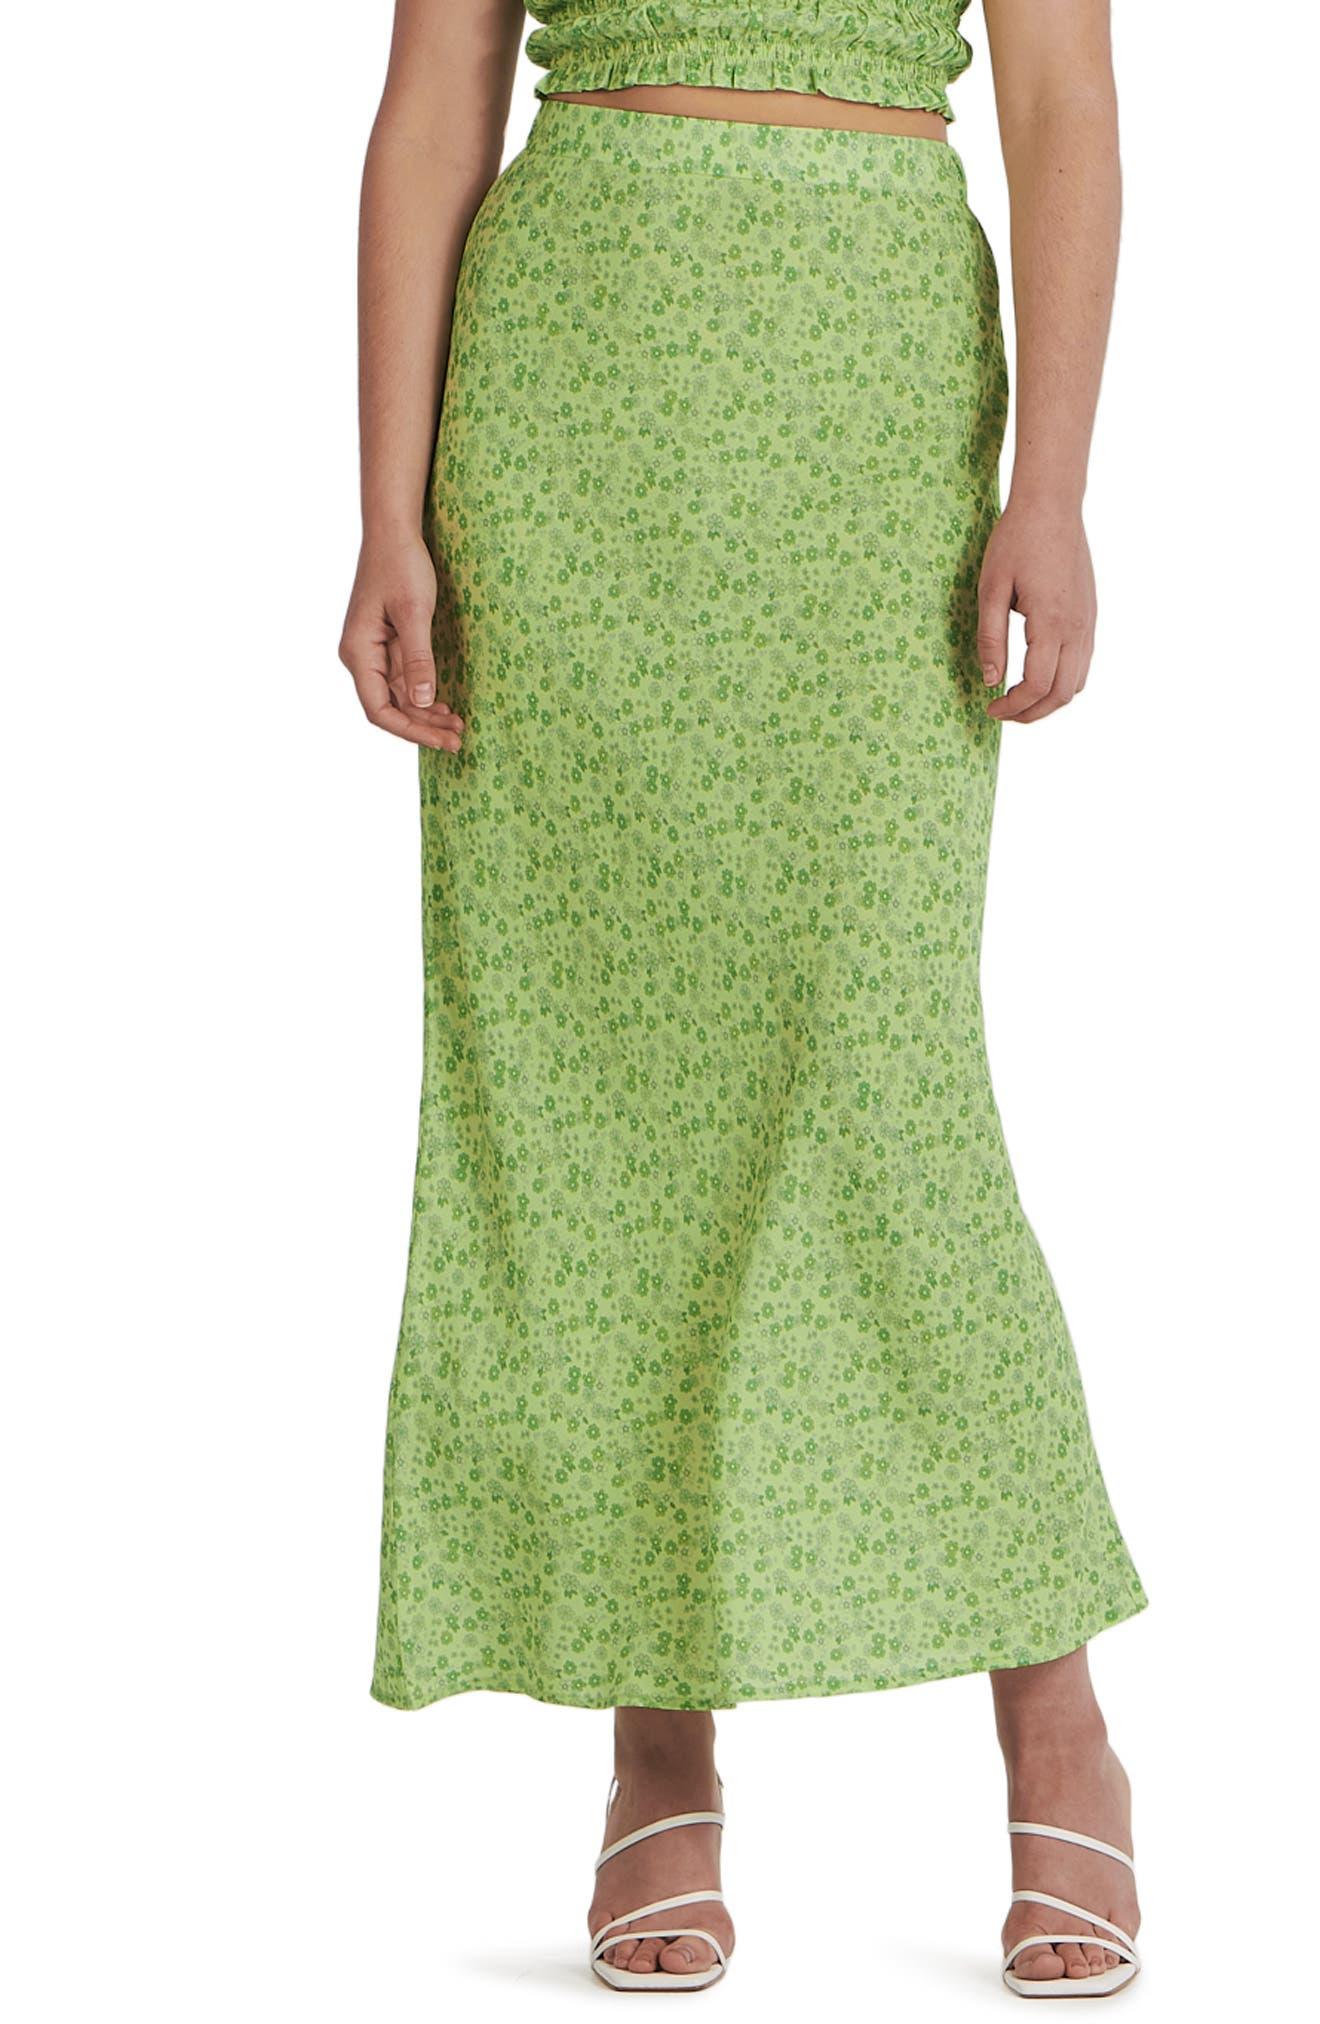 Aggregate more than 204 green holiday skirt super hot